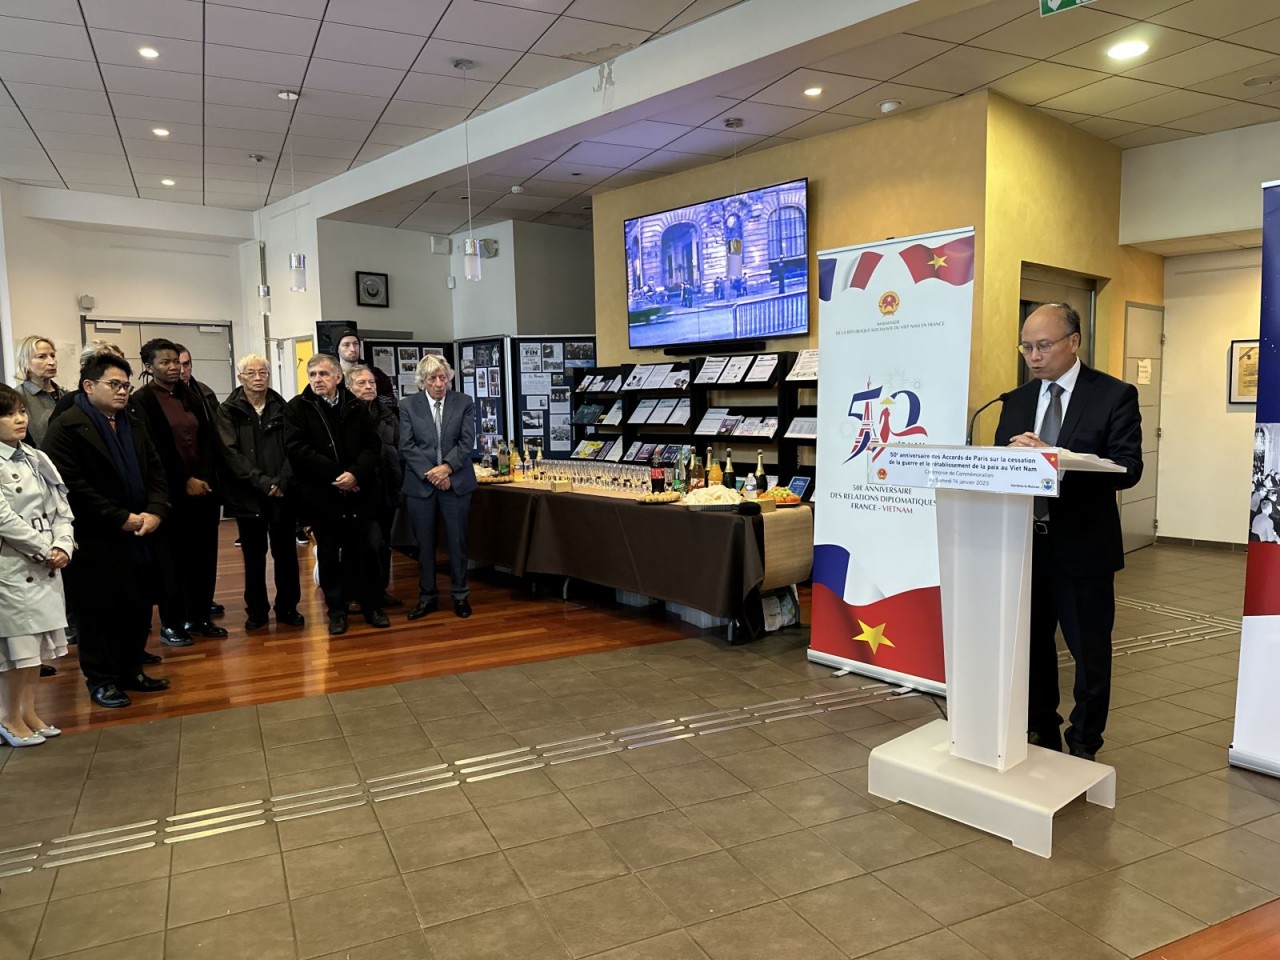 Anniversary of Paris Peace Accords Celebrated in French City